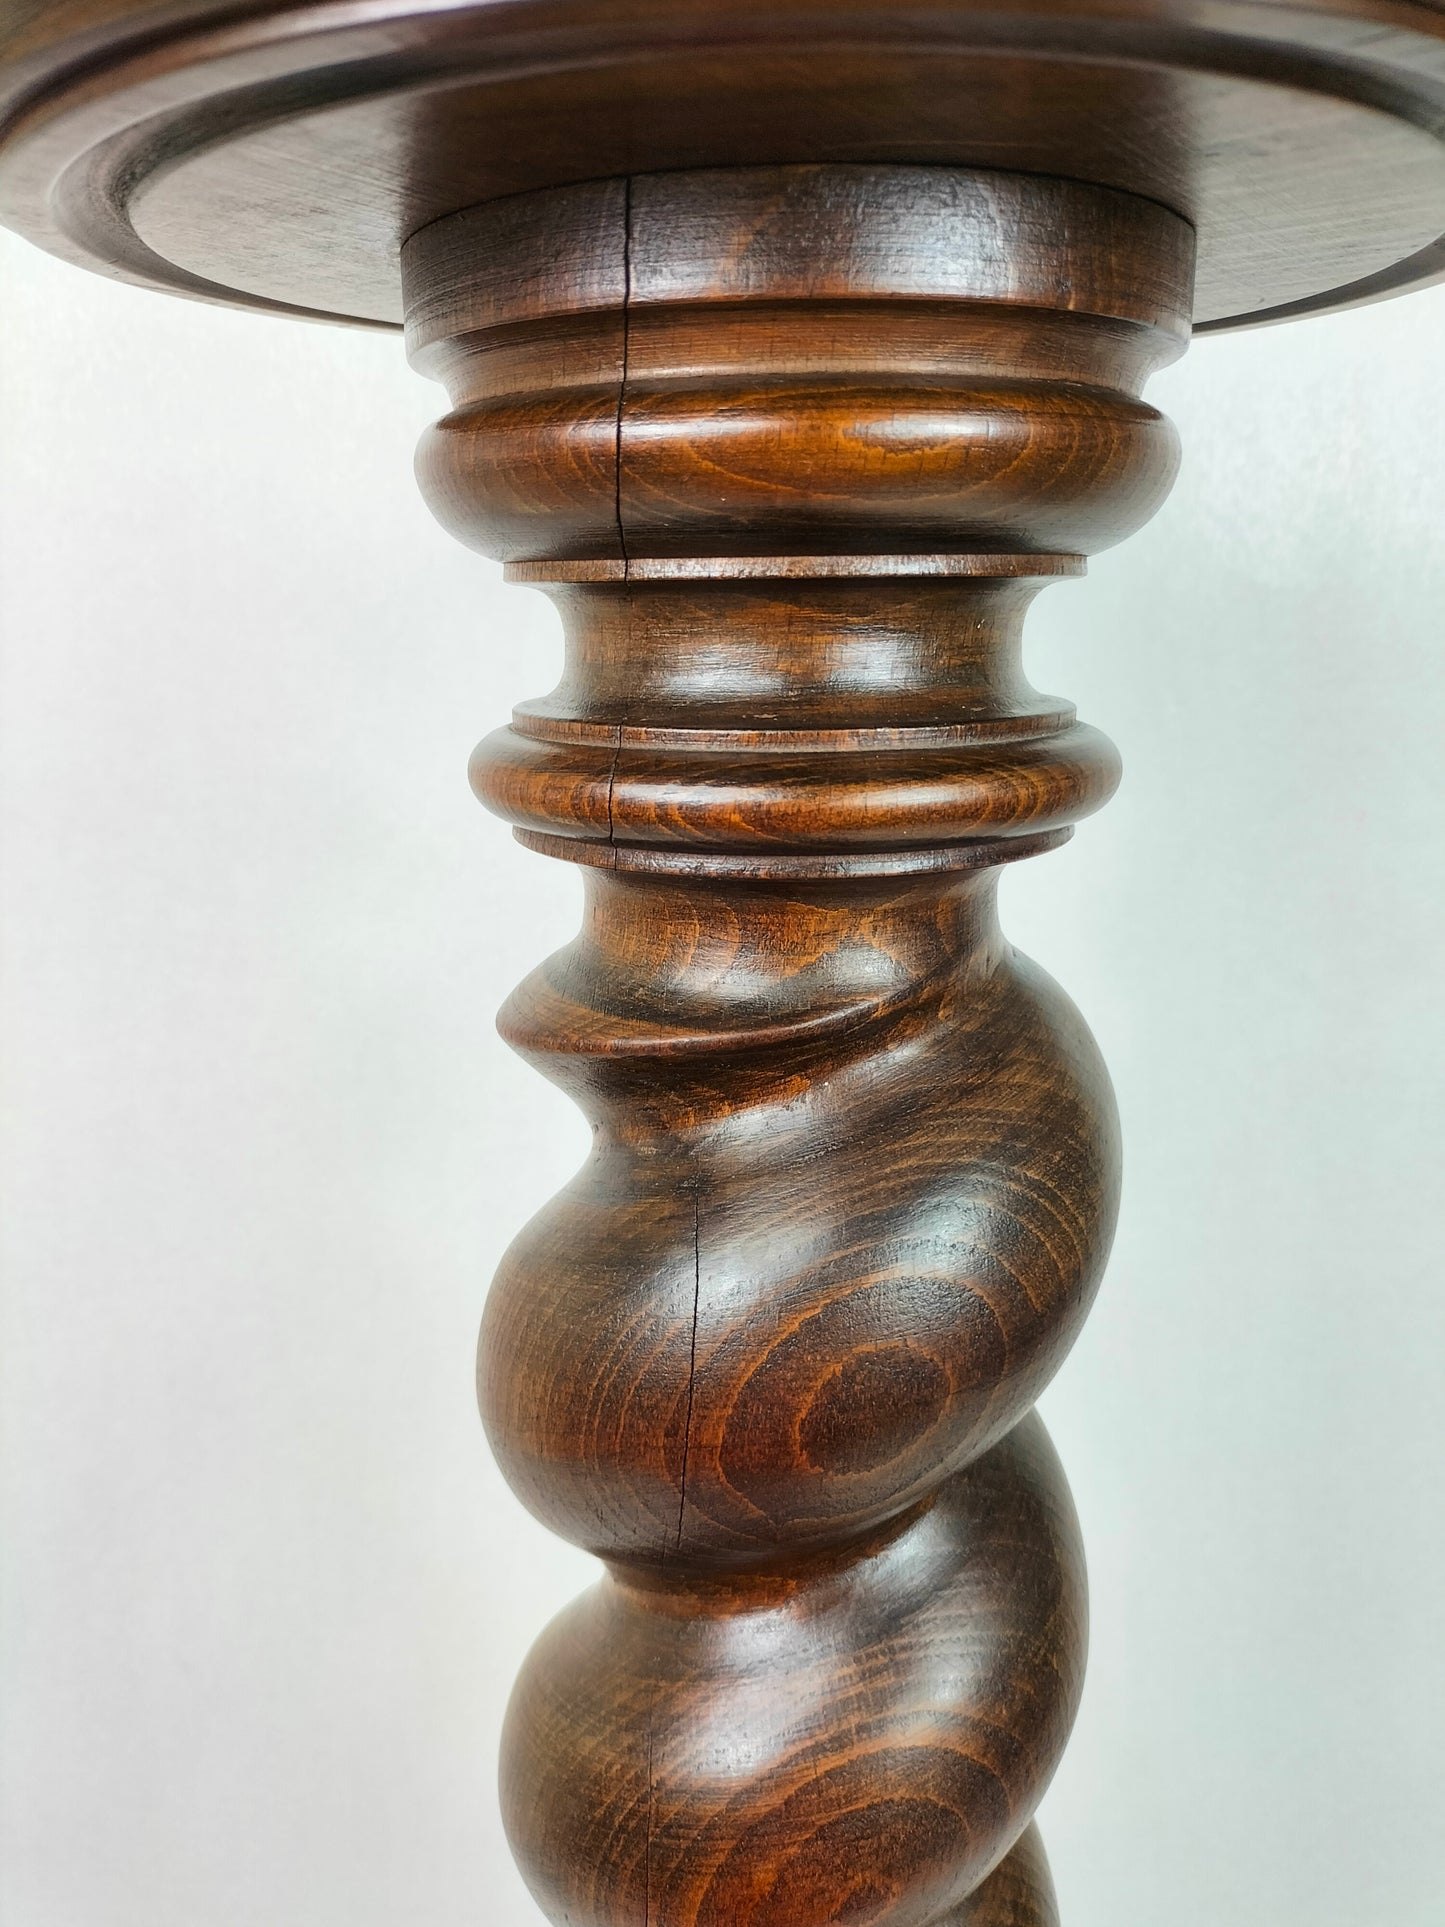 Vintage wooden barley twist plant stand // Oak - Early 20th century